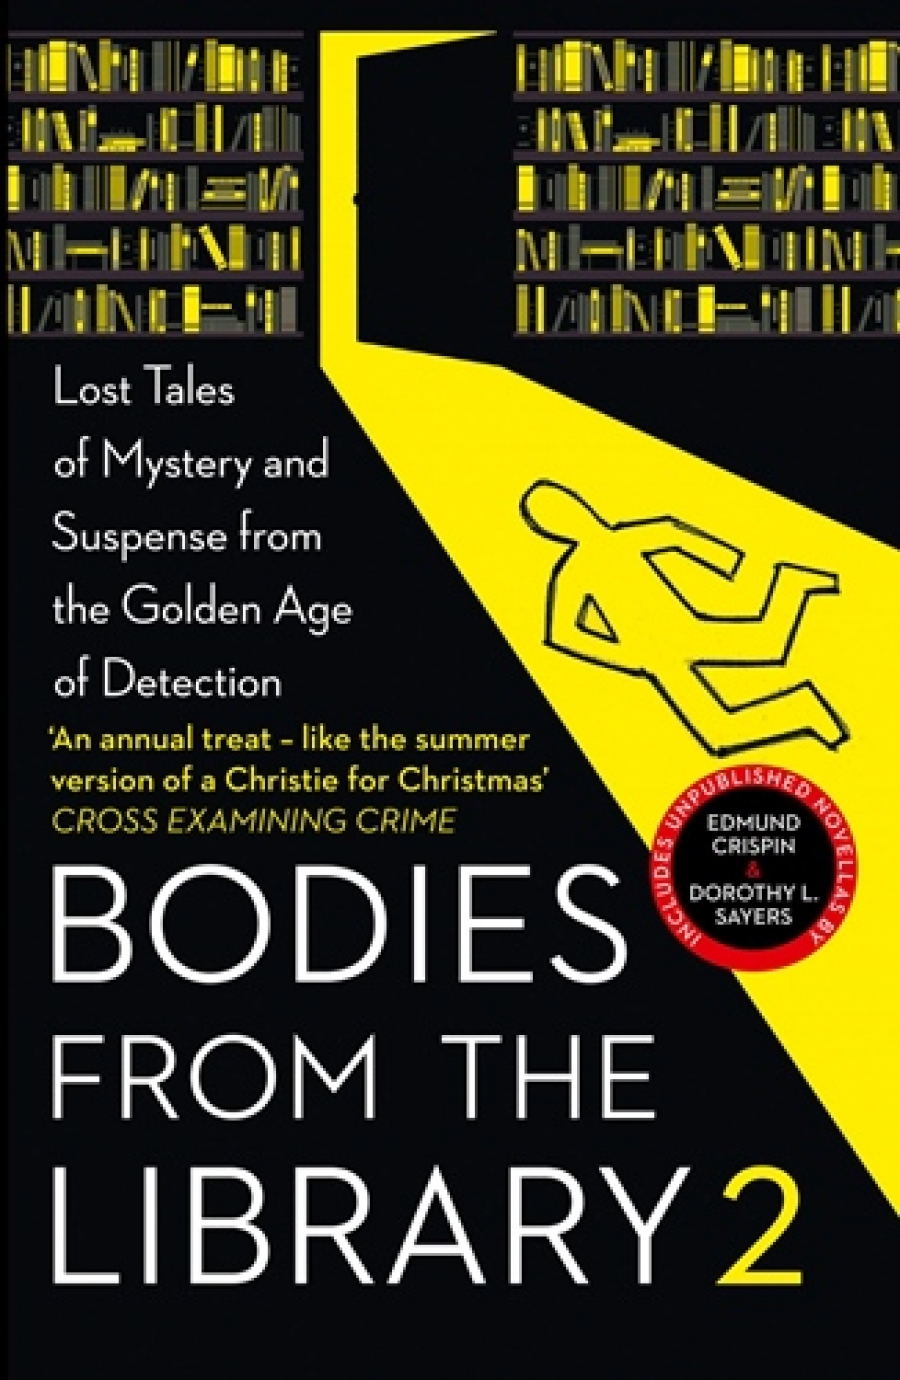 Medawar Tony Bodies from the Library 2: Forgotten Stories of Mystery and Suspense by the Queens of Crime and Other Masters of Golden Age Detection 